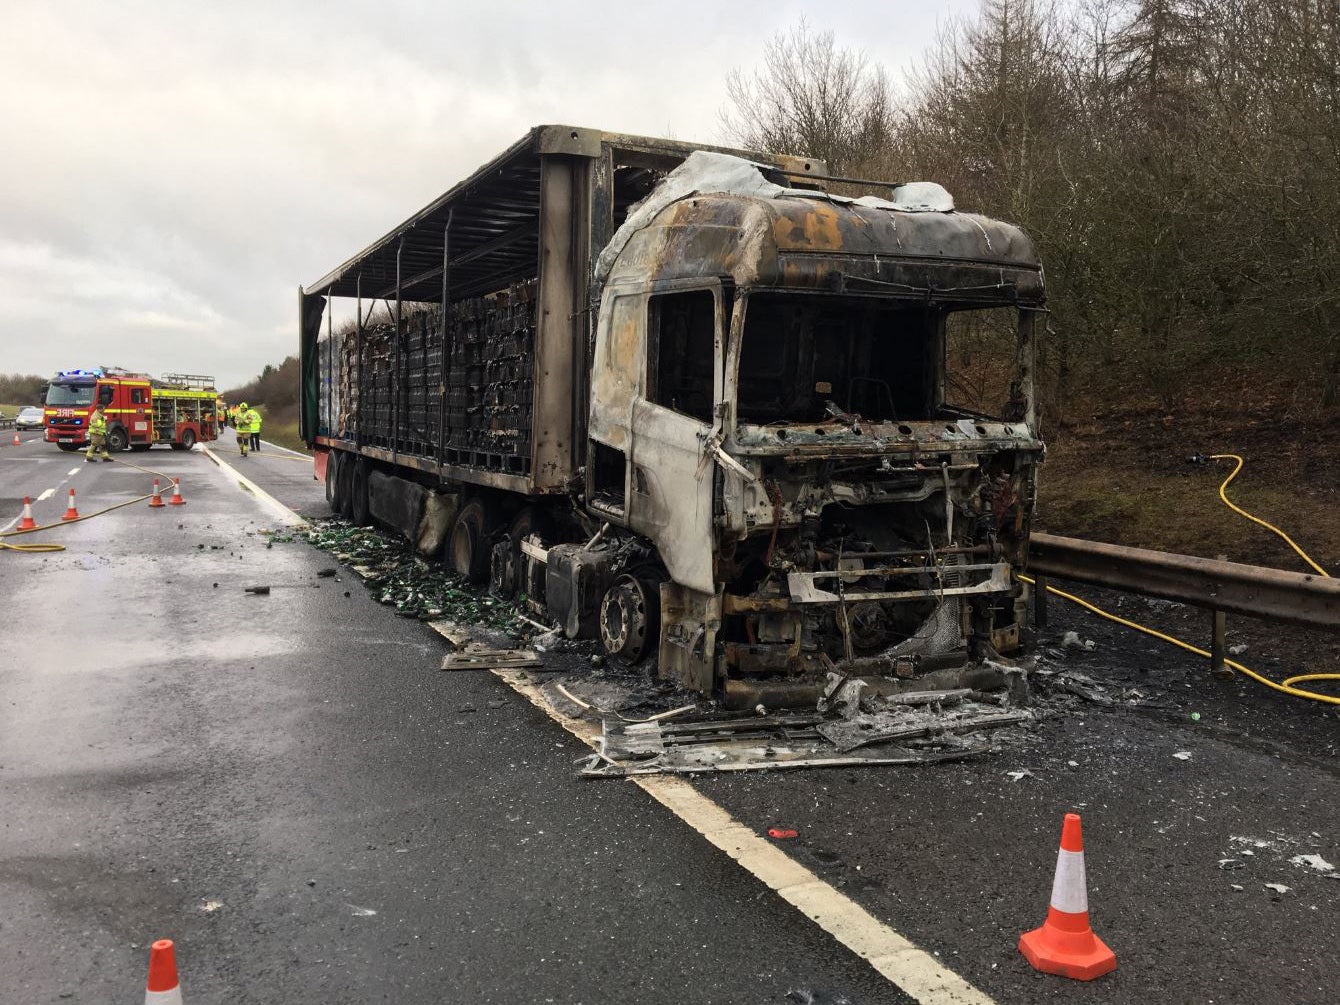 A lorry burst into flames on the M40, causing long delays